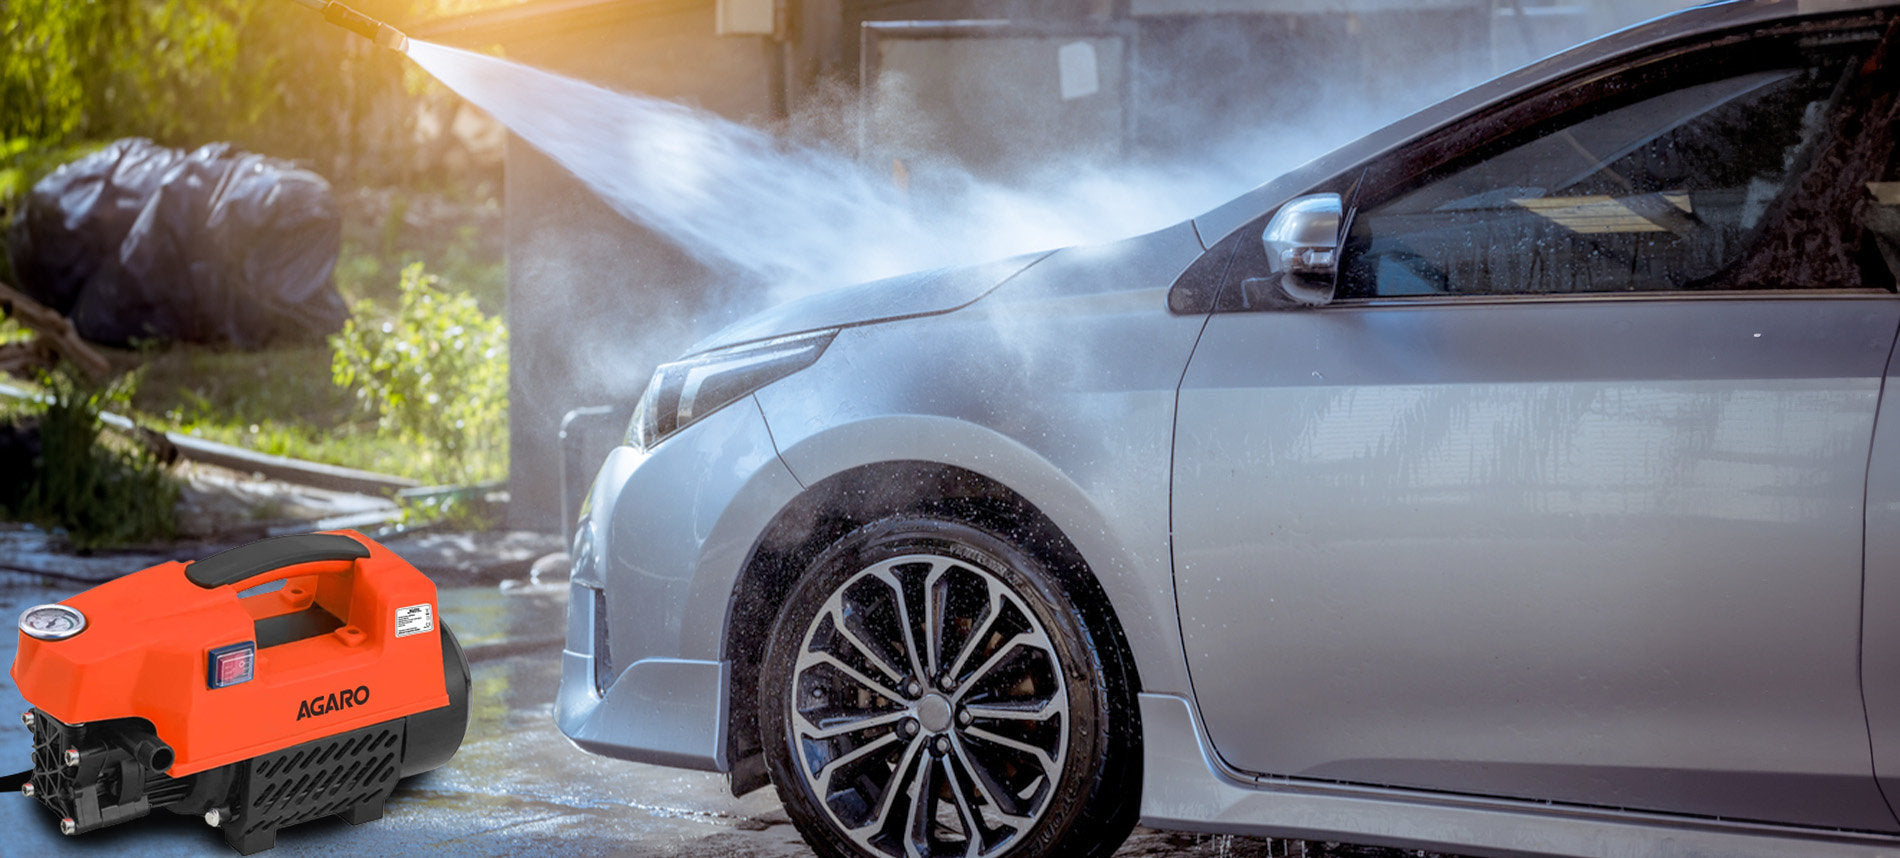 Best Pressure Washer for Your Car-2023 Edition: Hot Picks – Agaro